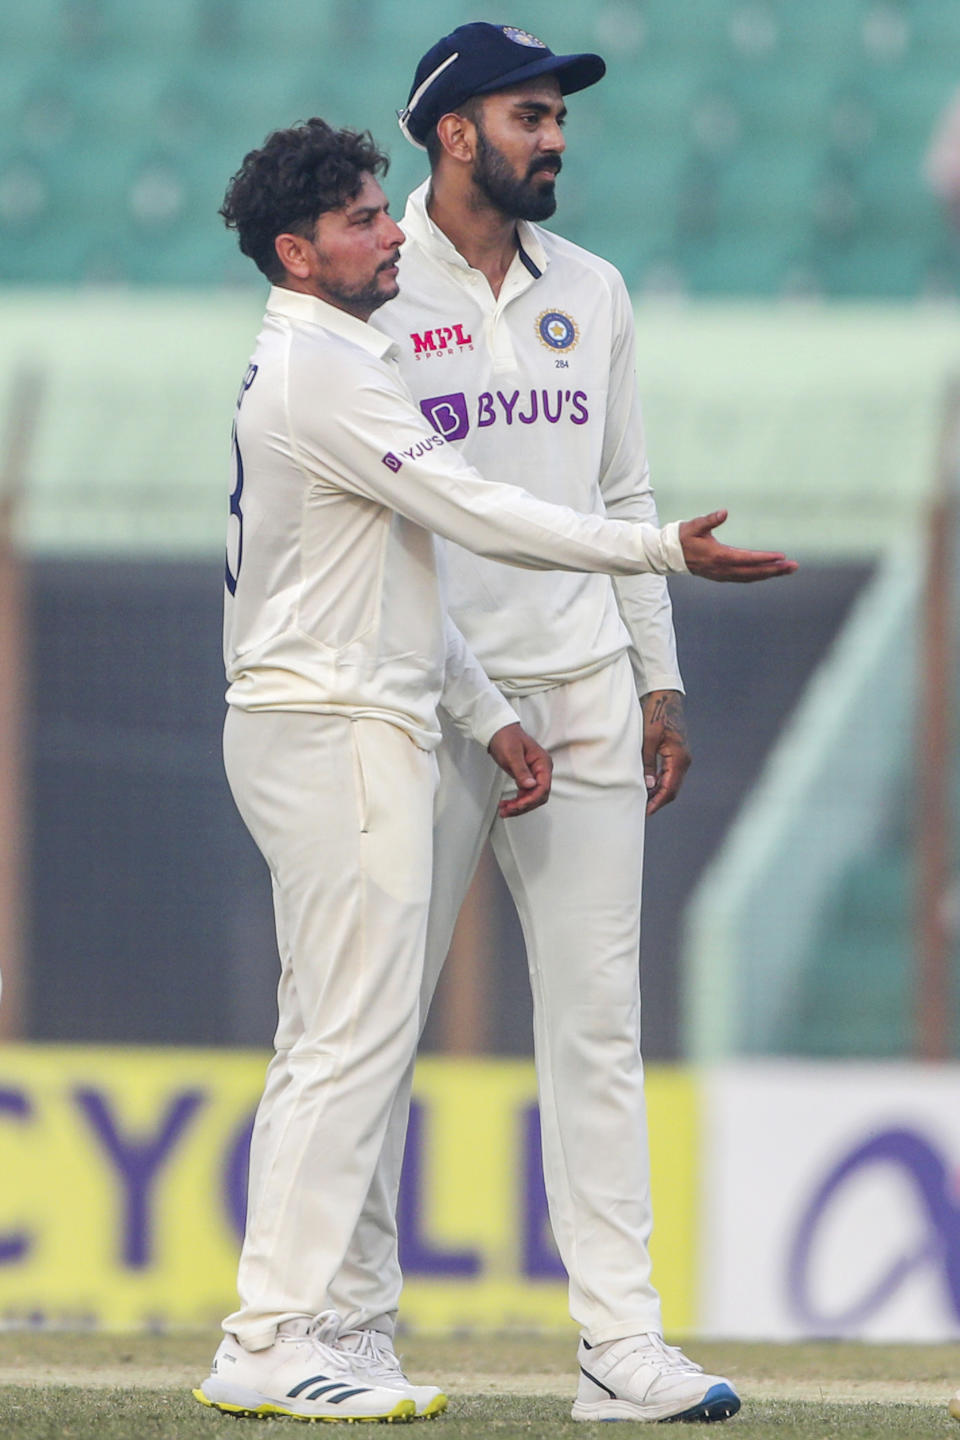 India's Kuldeep Yadav, left and captain K.L Rahul celebrate the wicket of Bangladesh's Nurul Hasan during the second day of the first test cricket match between Bangladesh and India in Chattogram, Bangladesh, Thursday, Dec. 15, 2022. (AP Photo/Surjeet Yadav)